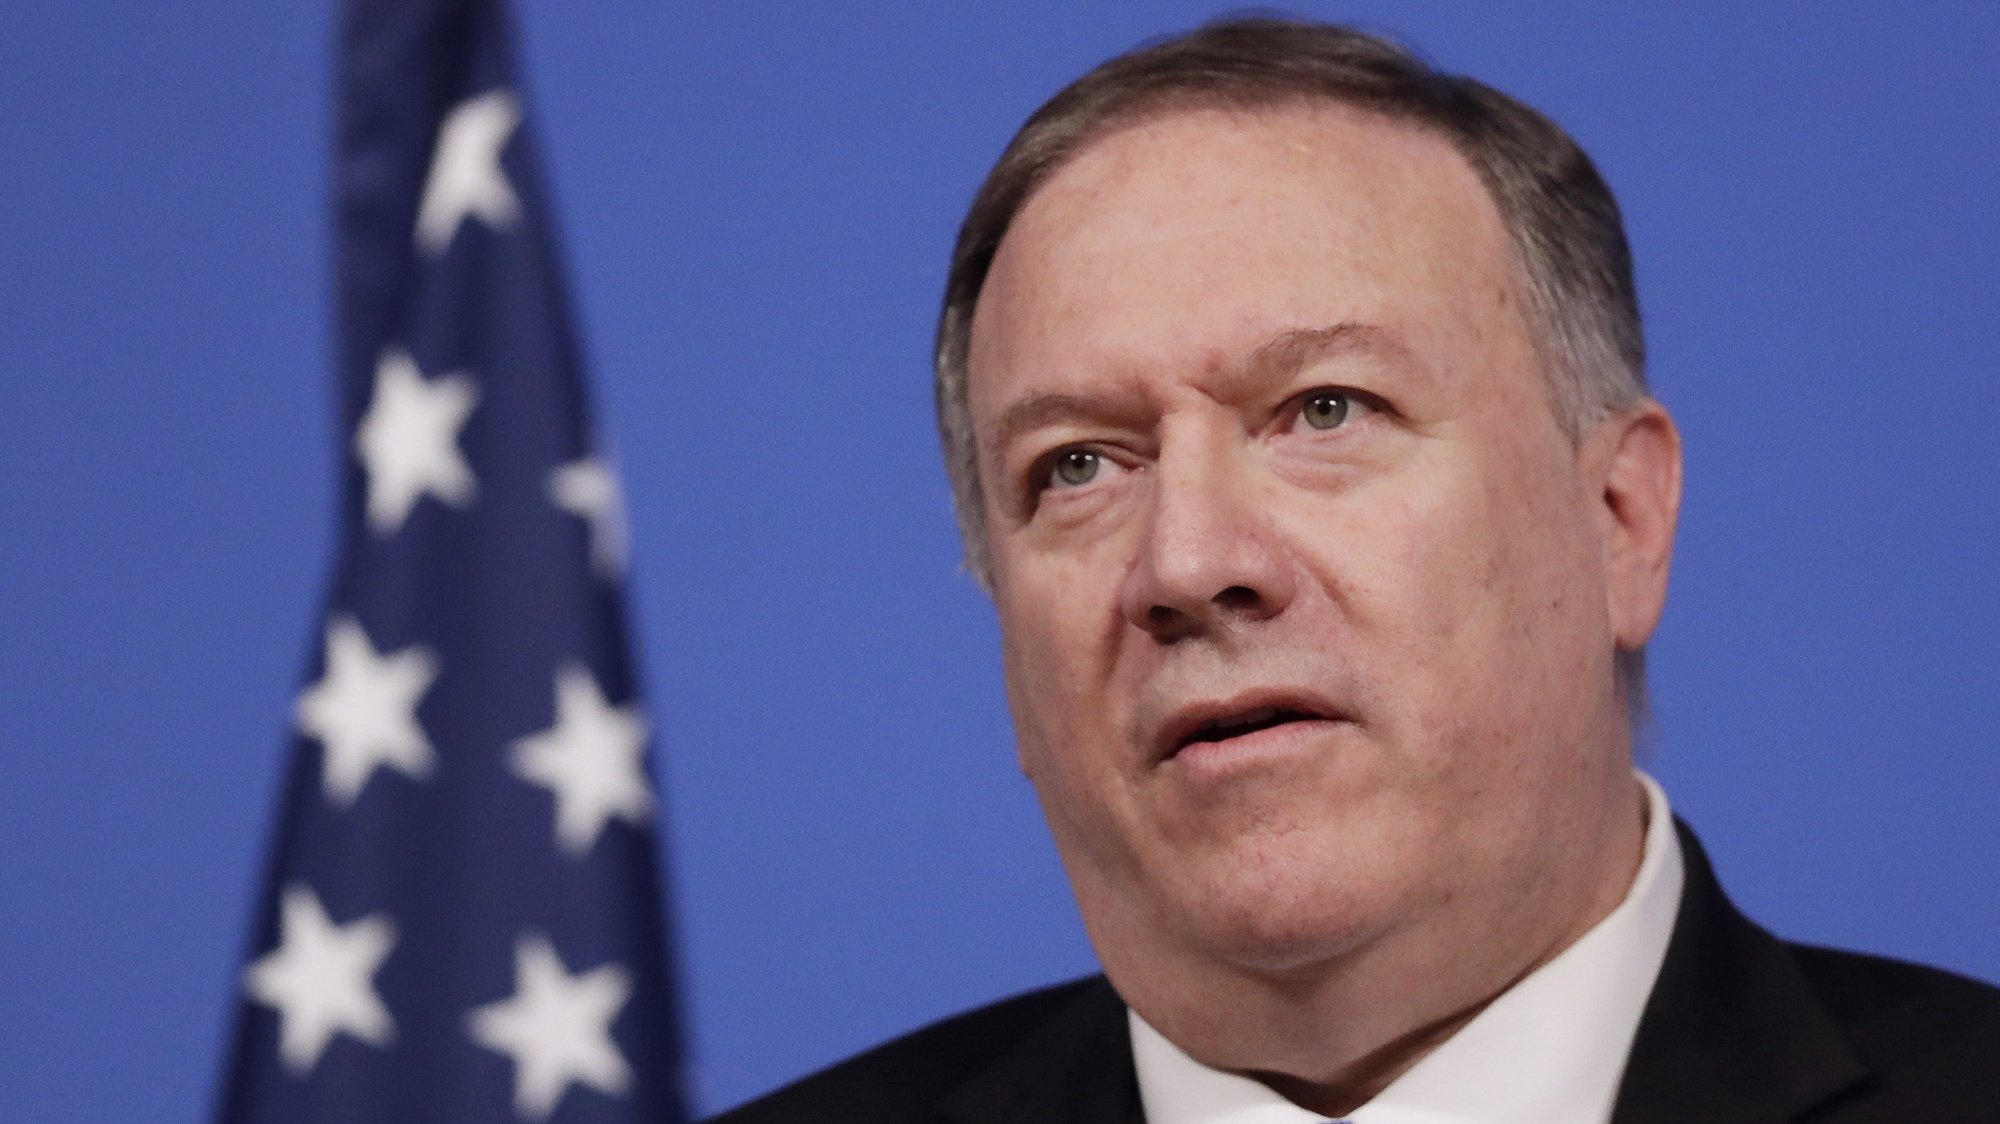 epa08933372 (FILE) - US Secretary of State Mike Pompeo speaks during a press conference during NATO foreign ministers meeting in Brussels, Belgium, 20 November 2019 (reissued 12 January 2021). The US State Separtment on 12 January 2021 announced that State Secretay Mike Pompeo&#039;s trip to Belgium has been cancelled. The trip was scheduled for 13-14 January.  EPA/OLIVIER HOSLET *** Local Caption *** 55648040